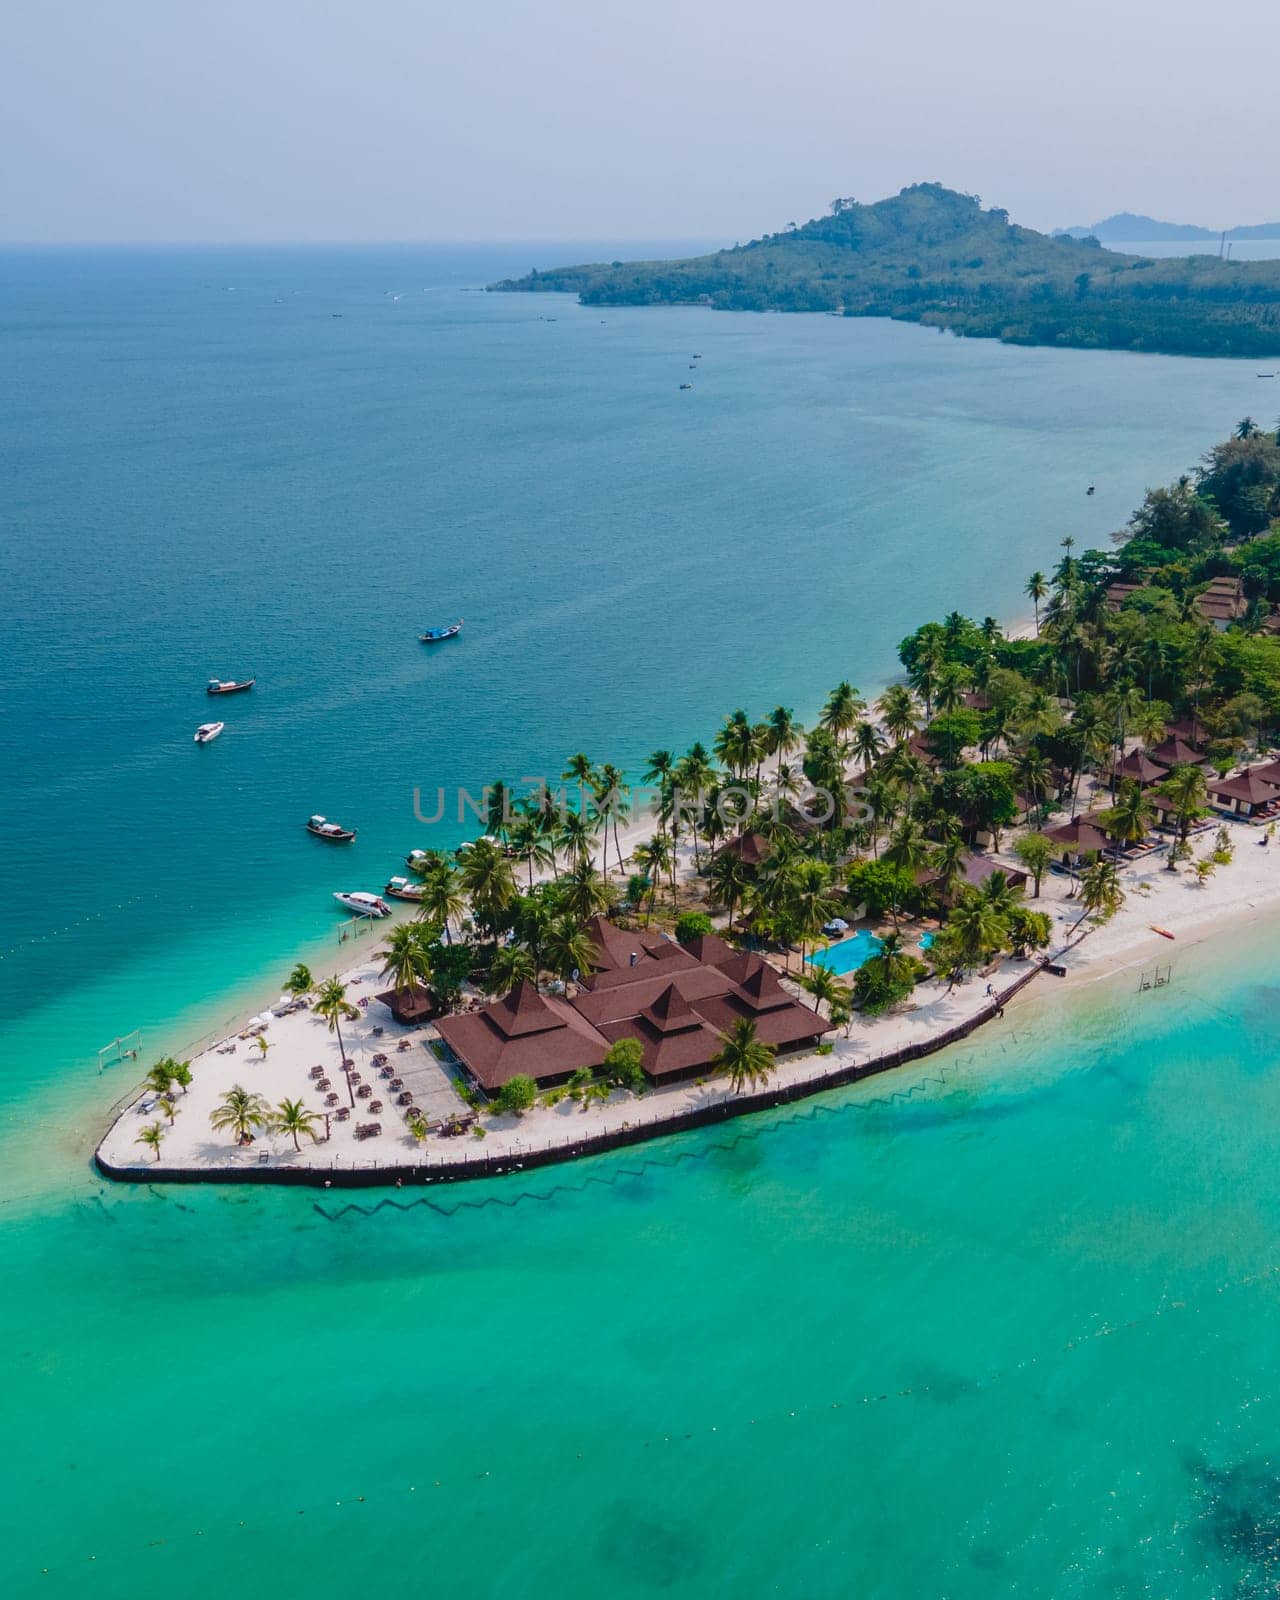 Koh Mook tropical Island in the Andaman Sea in Thailand, tropical beach with white sand and turqouse colored ocean with coconut palm trees.